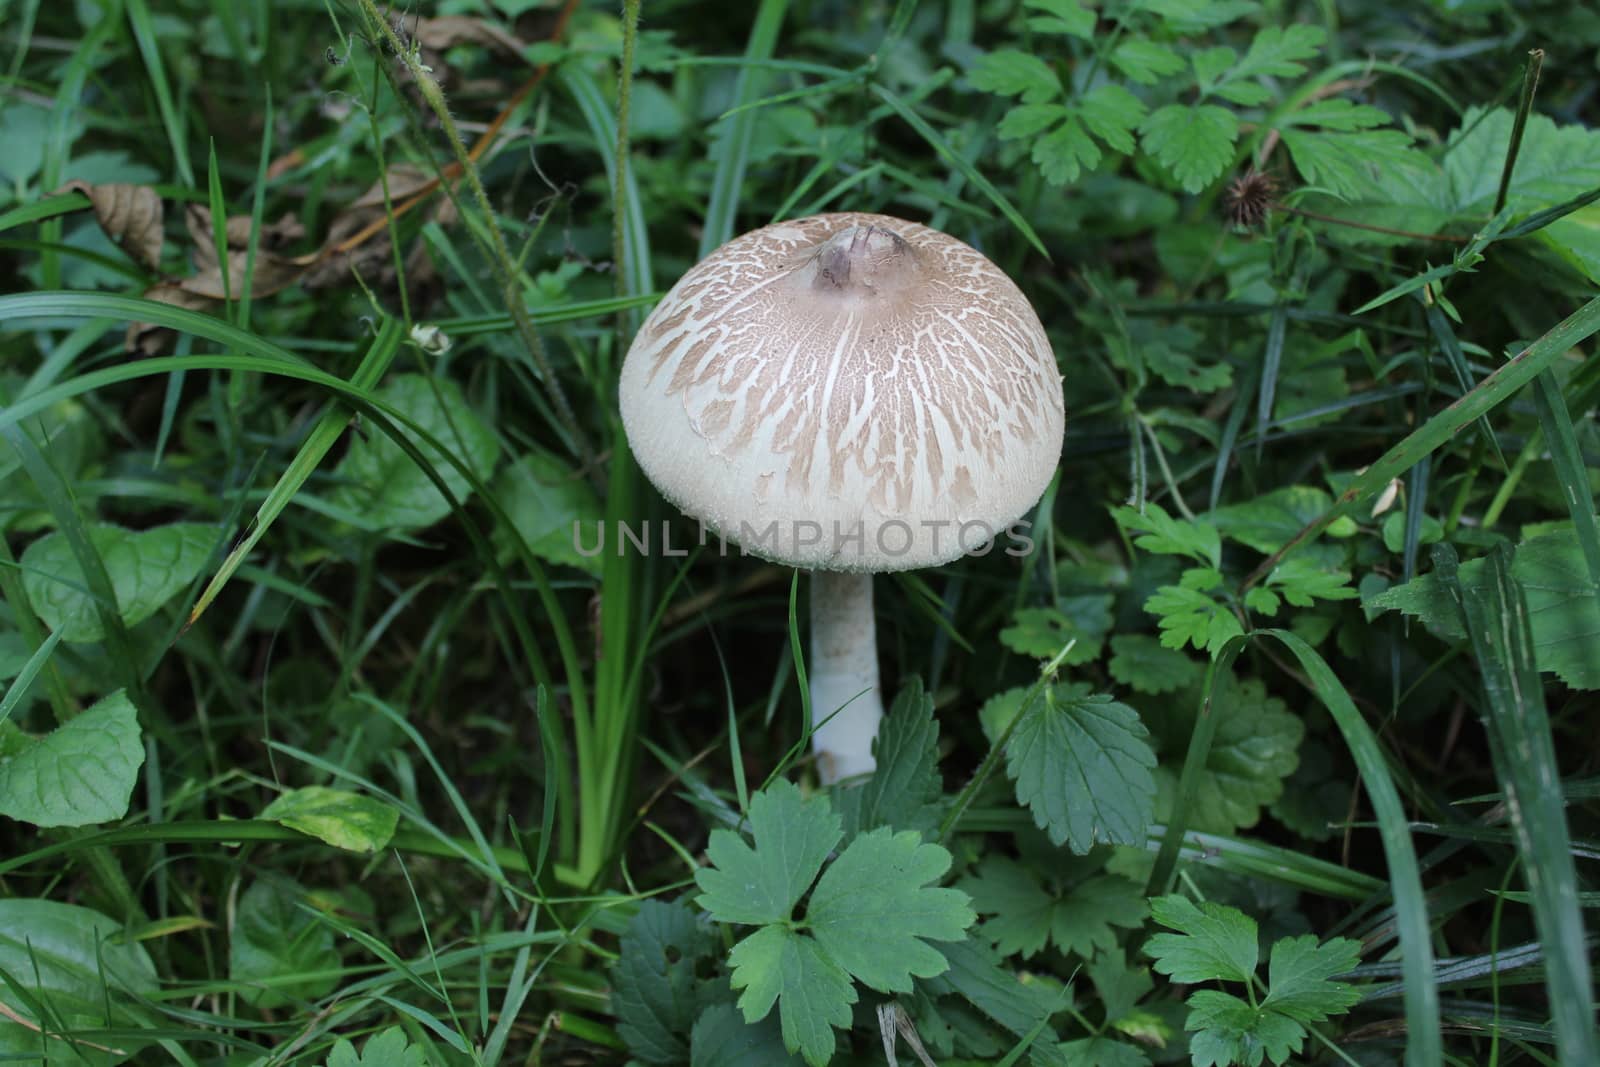 mushroom in the grass in the forest by martina_unbehauen